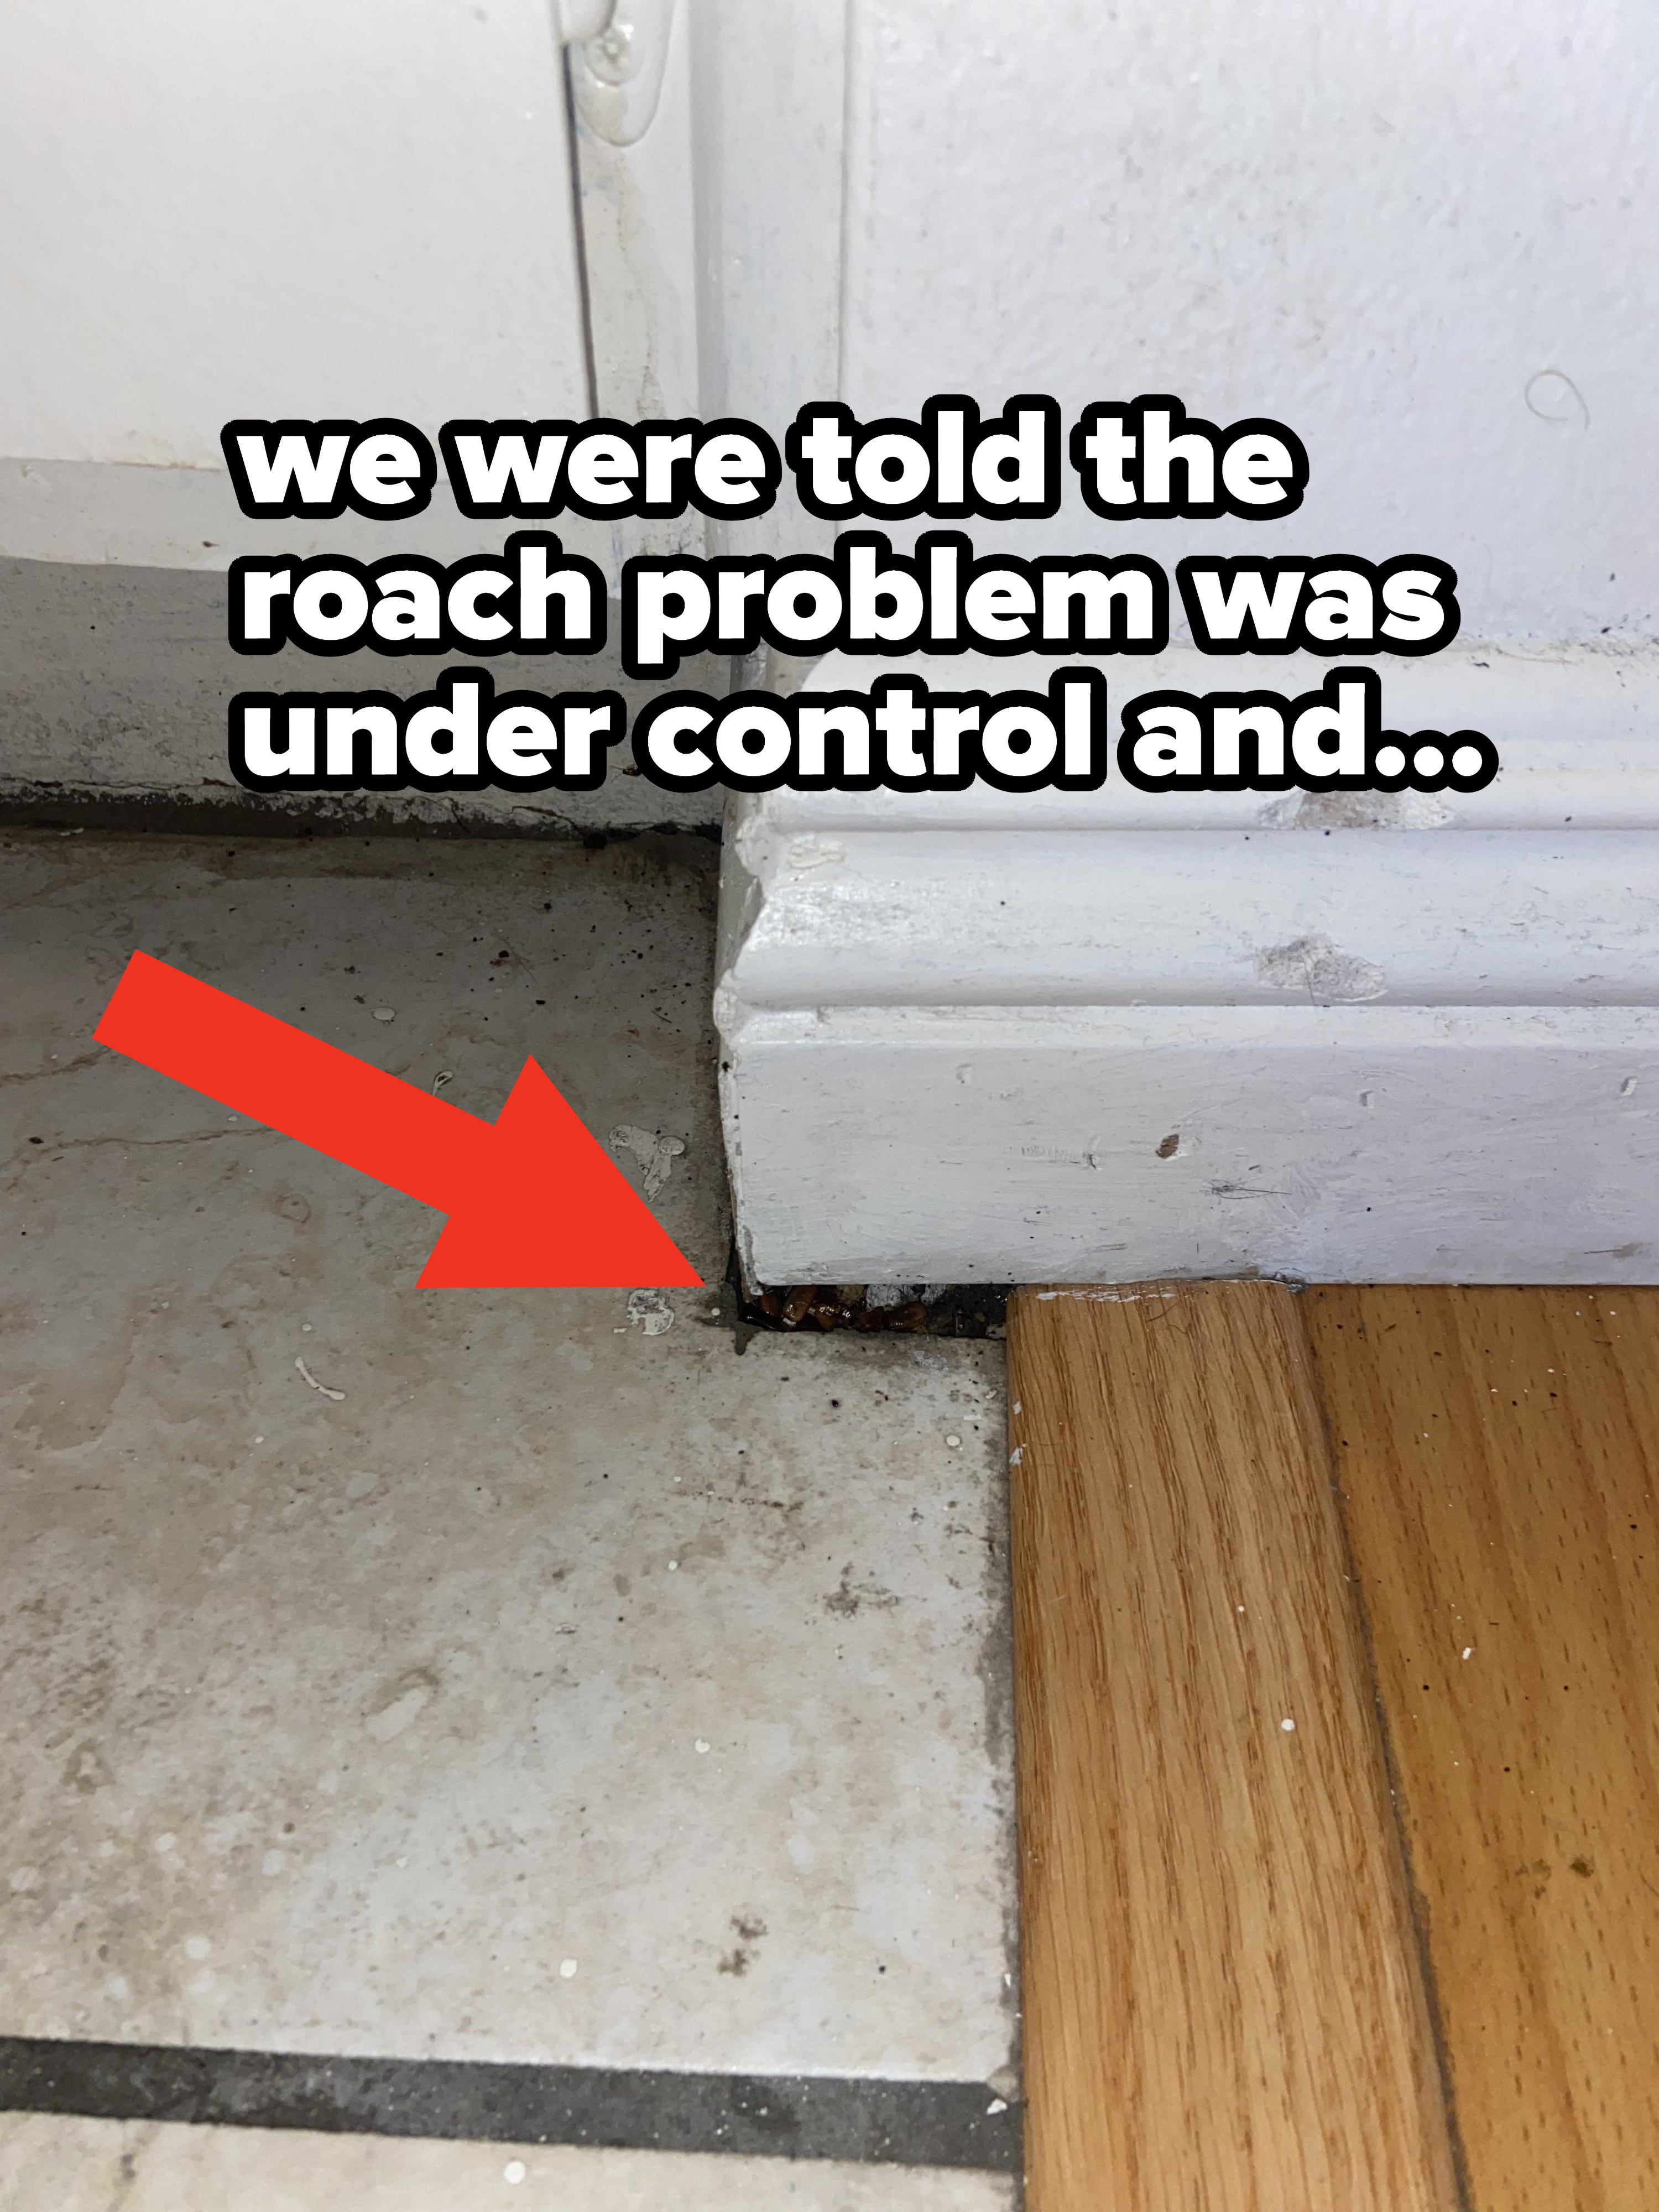 Arrow pointing to what appear to be large roaches in a crevice between the floor and the wall